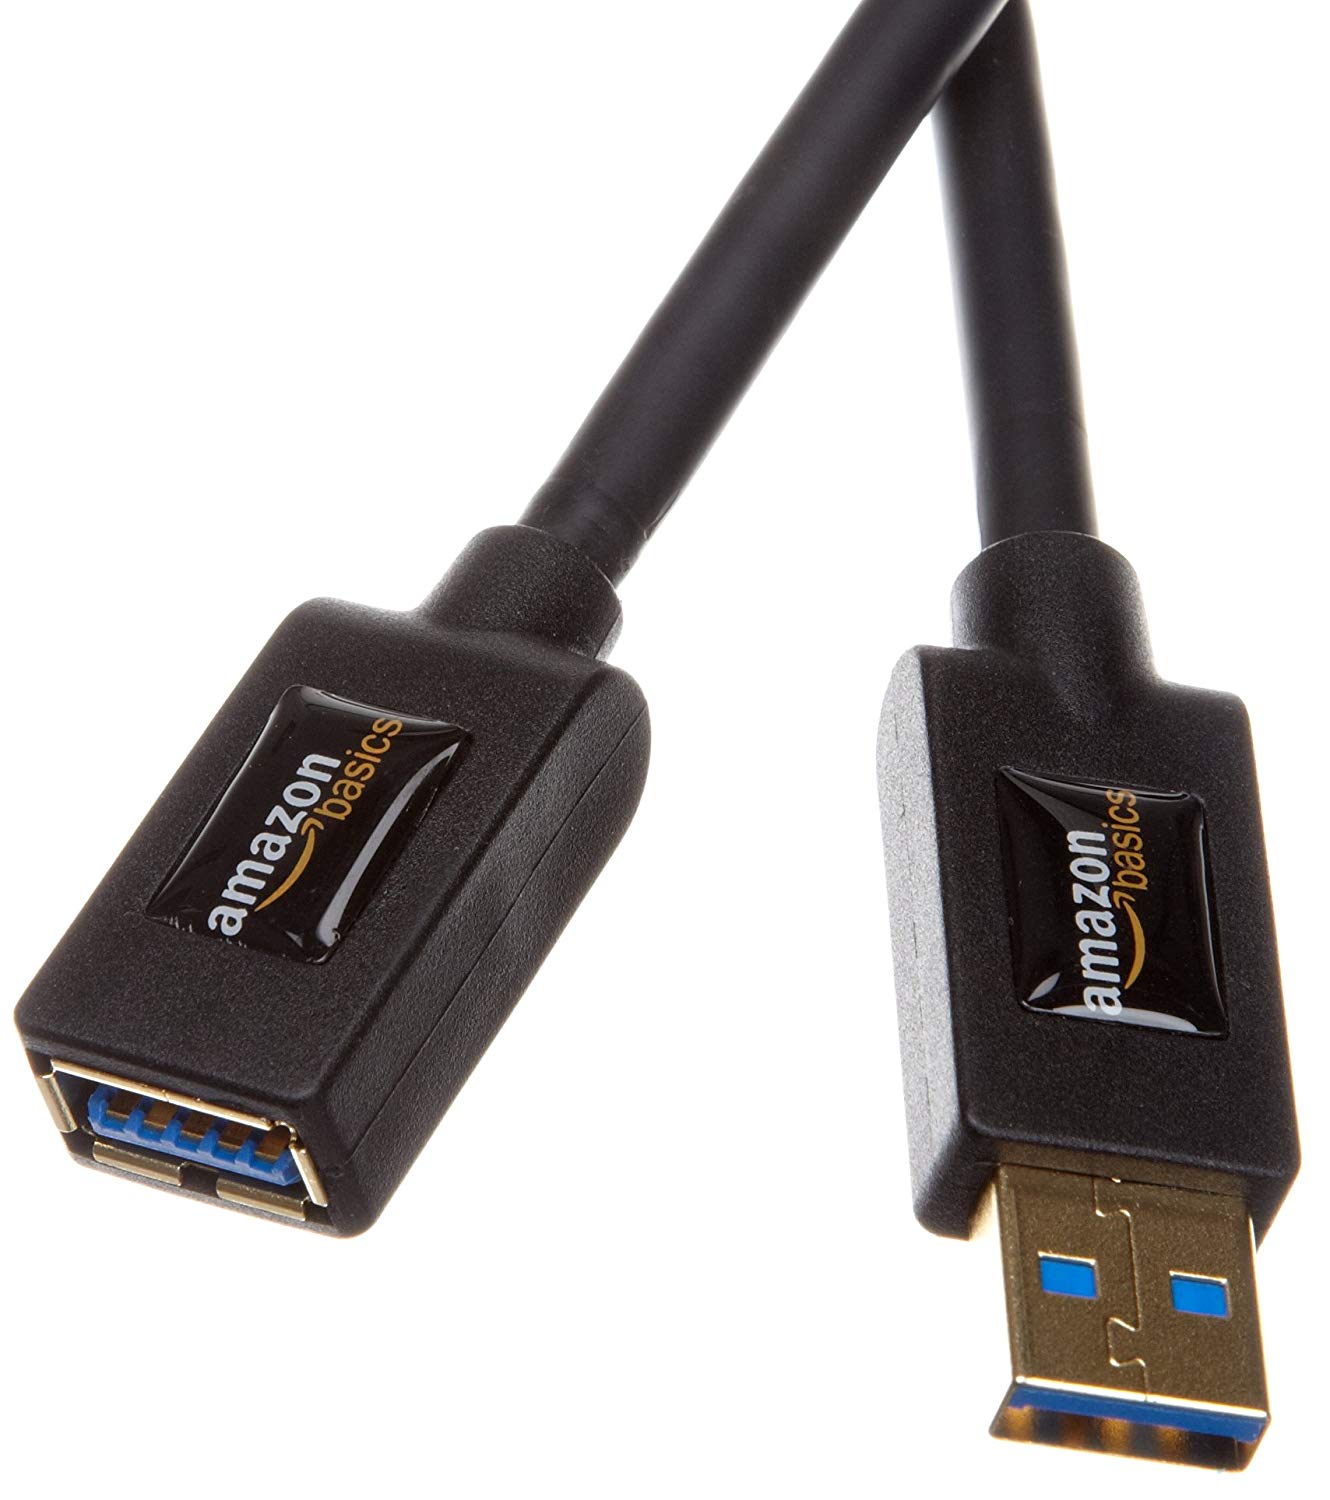 AmazonBasics USB 3.0 Extension Cable - A-Male to A-Female Adapter Cord - 3.3 Feet - 1 Meter.